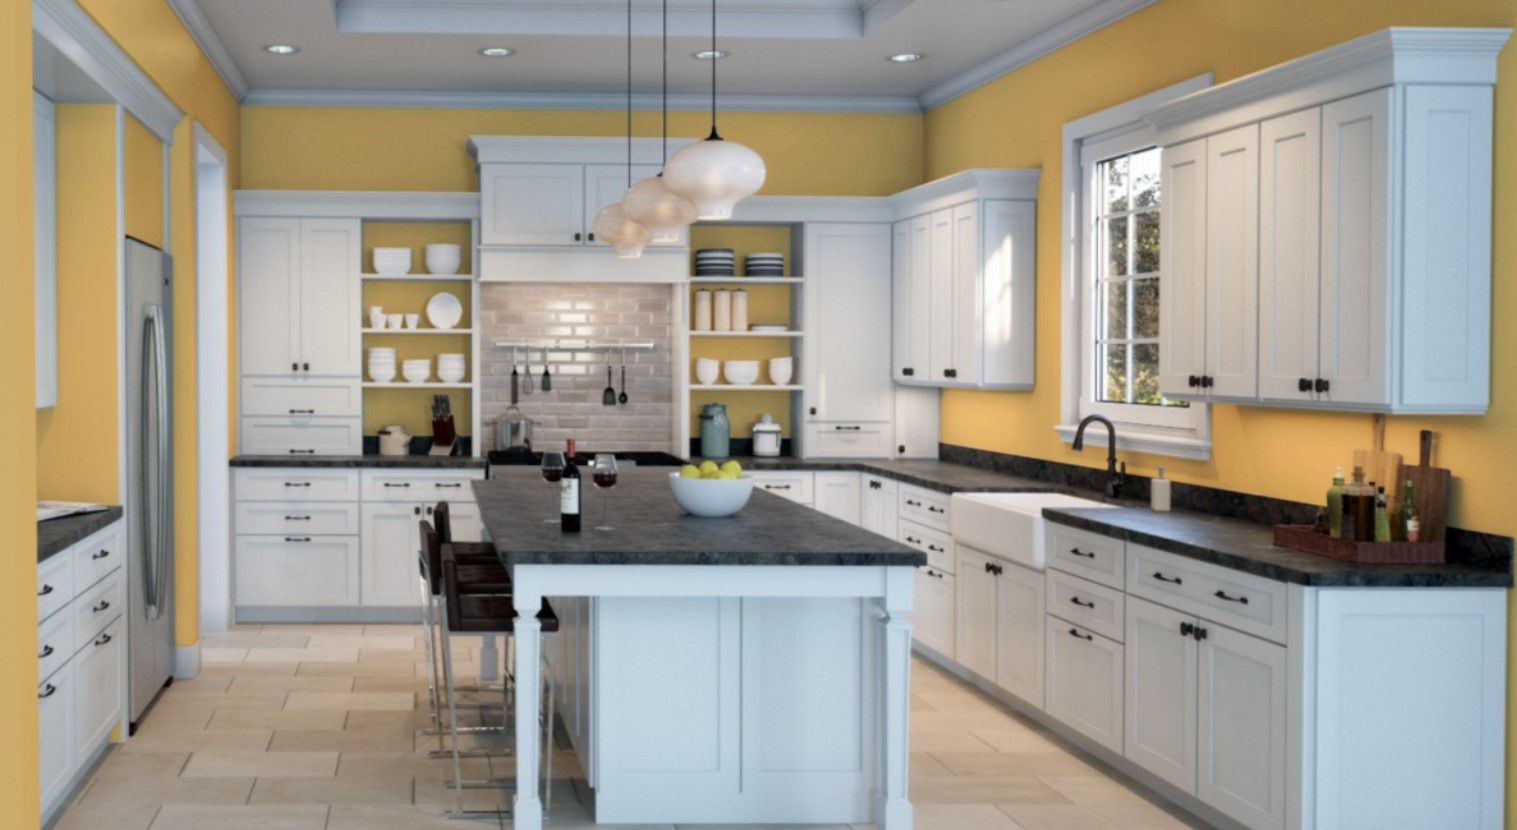 Sherwin Williams Afternoon looks vivid and beautiful when paired with a white color. (2)